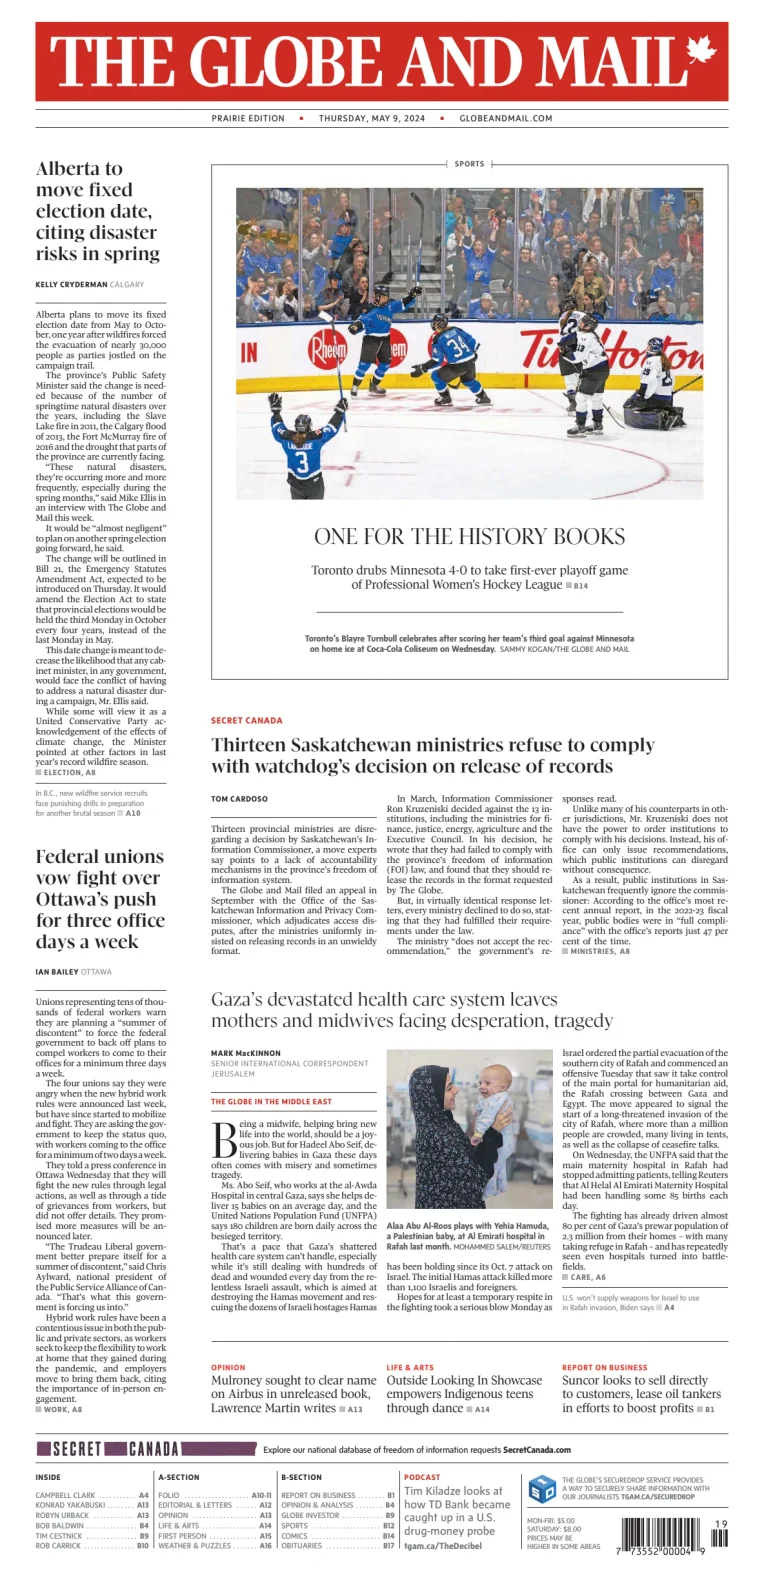 The Globe and Mail (Prairie Edition)